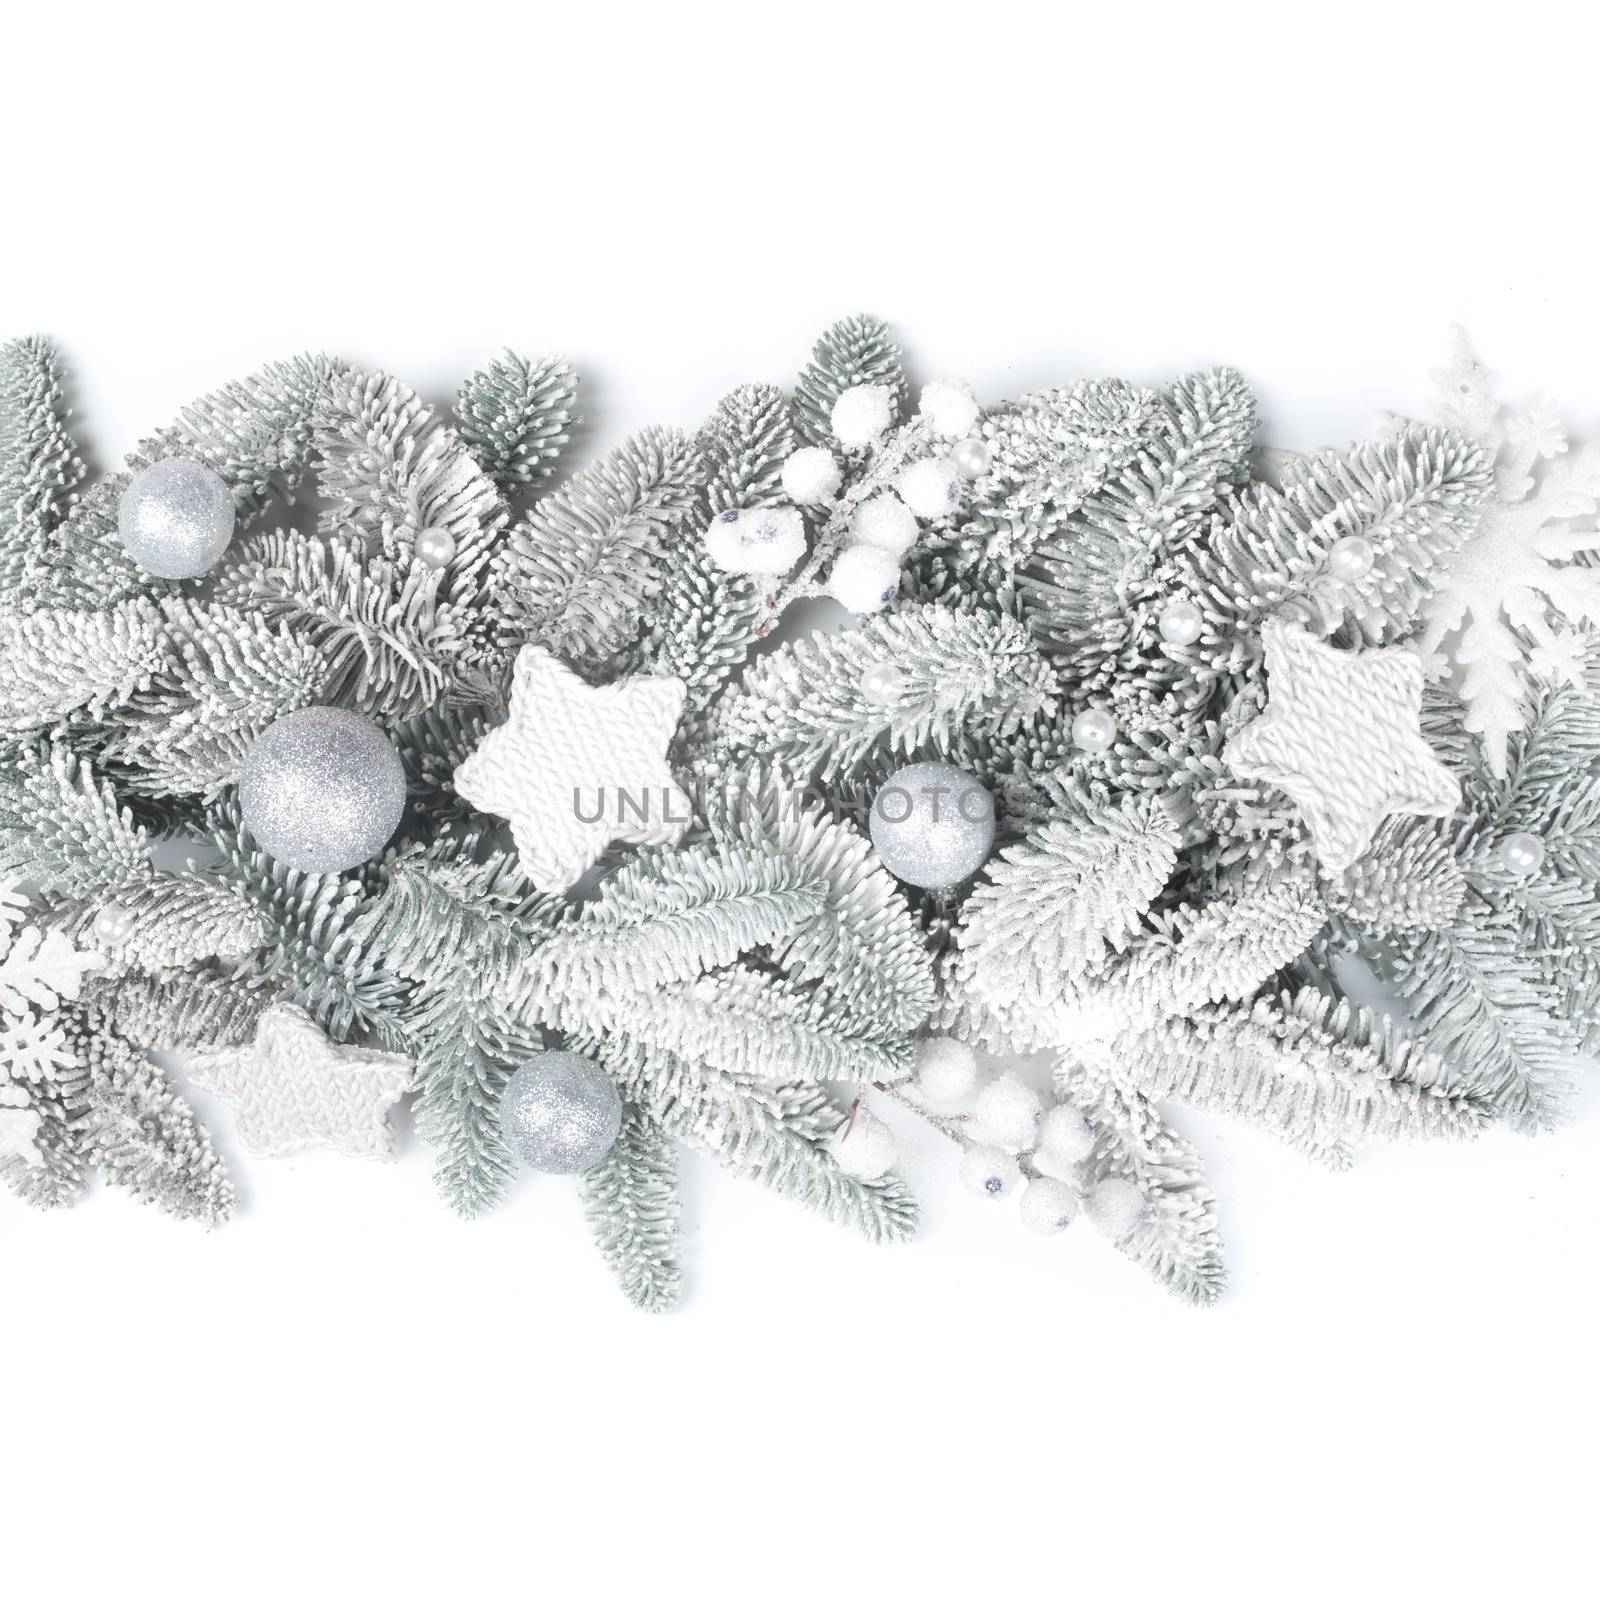 Frosted fir tree twigs and Christmas decorative bauble balls isolated on white background with copy space for text template flat lay top view design